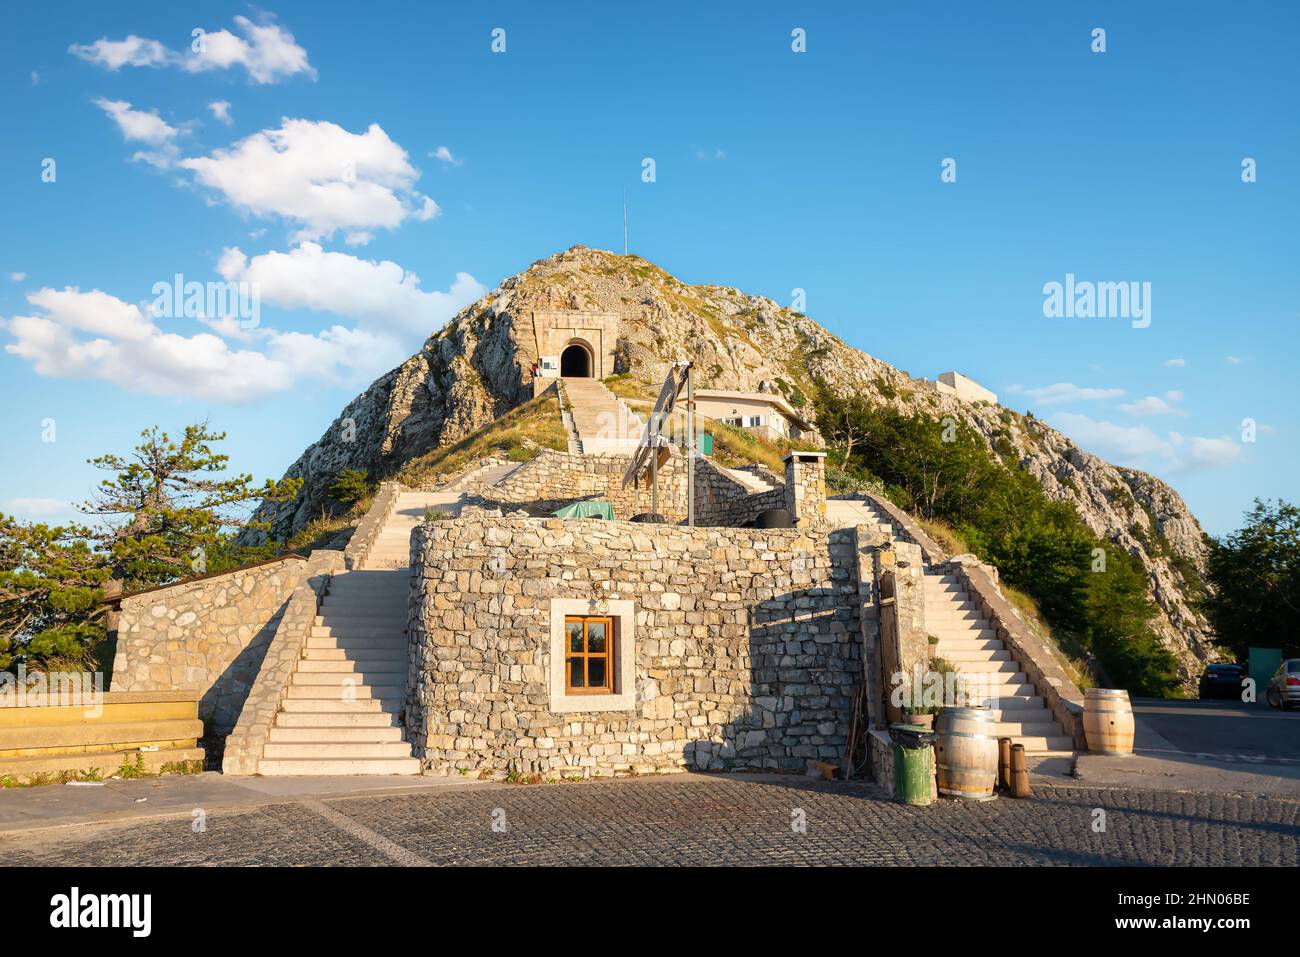 Mausoleum of Petar Petrovic Njegos. Historical mausoleum building of Petar Petrovic Njegos - montenegrin poet and ruler - in mountains of National Par Stock Photo